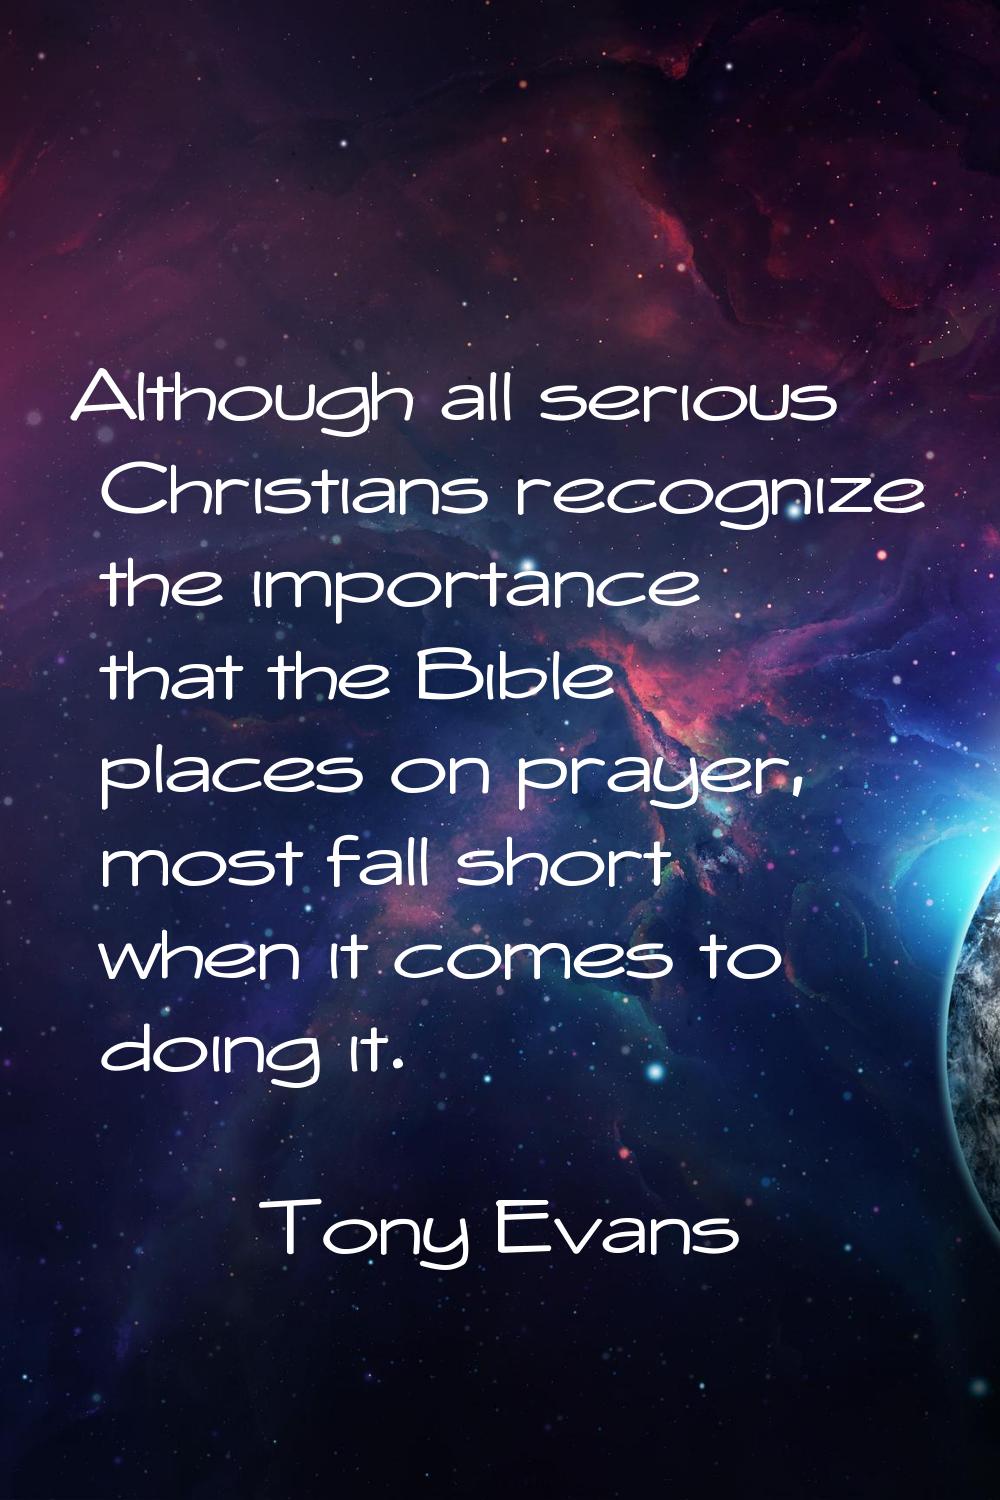 Although all serious Christians recognize the importance that the Bible places on prayer, most fall